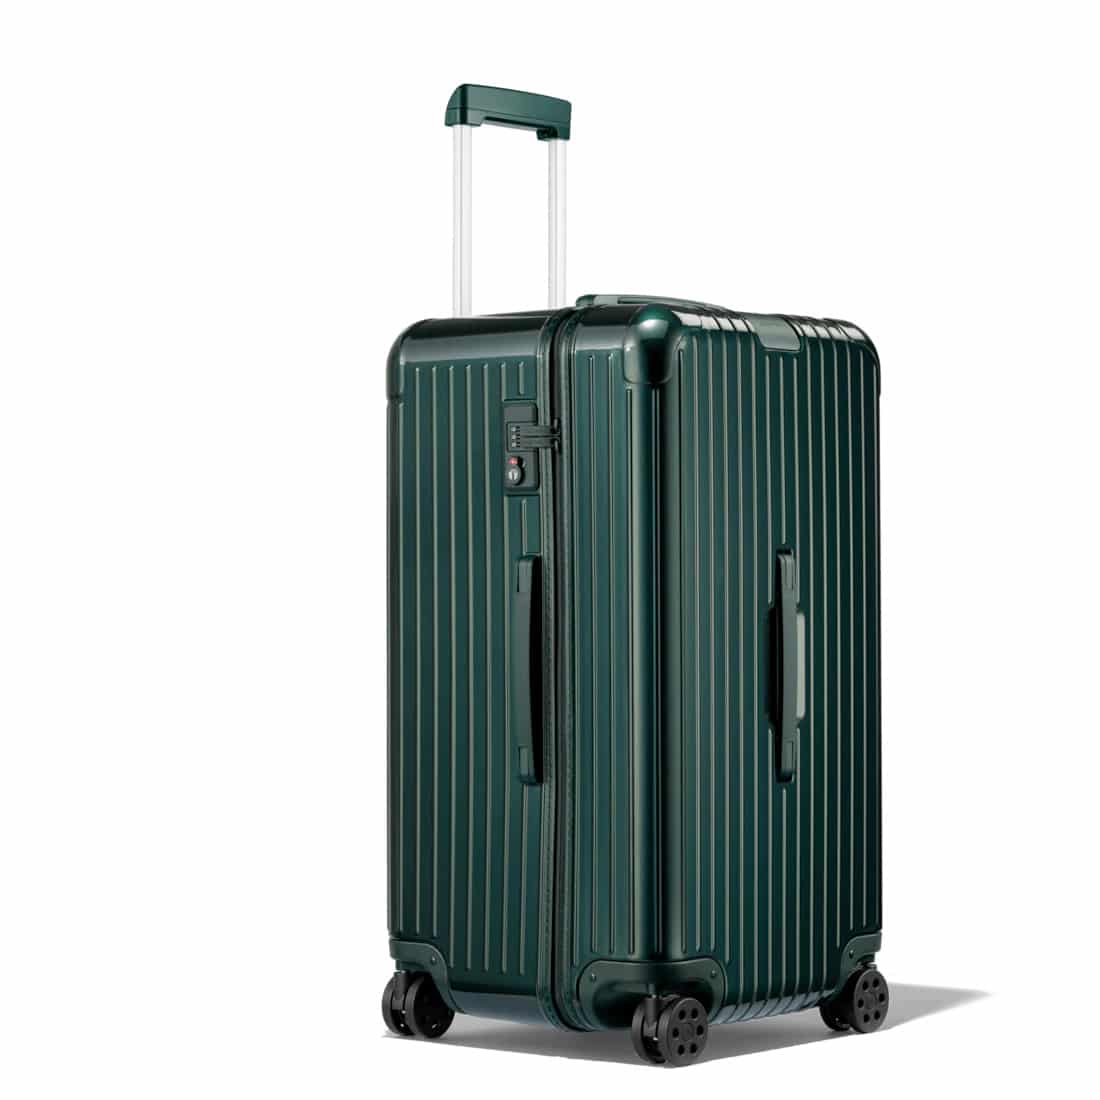 Rimowa Luggage Review Must Read This Before Buying